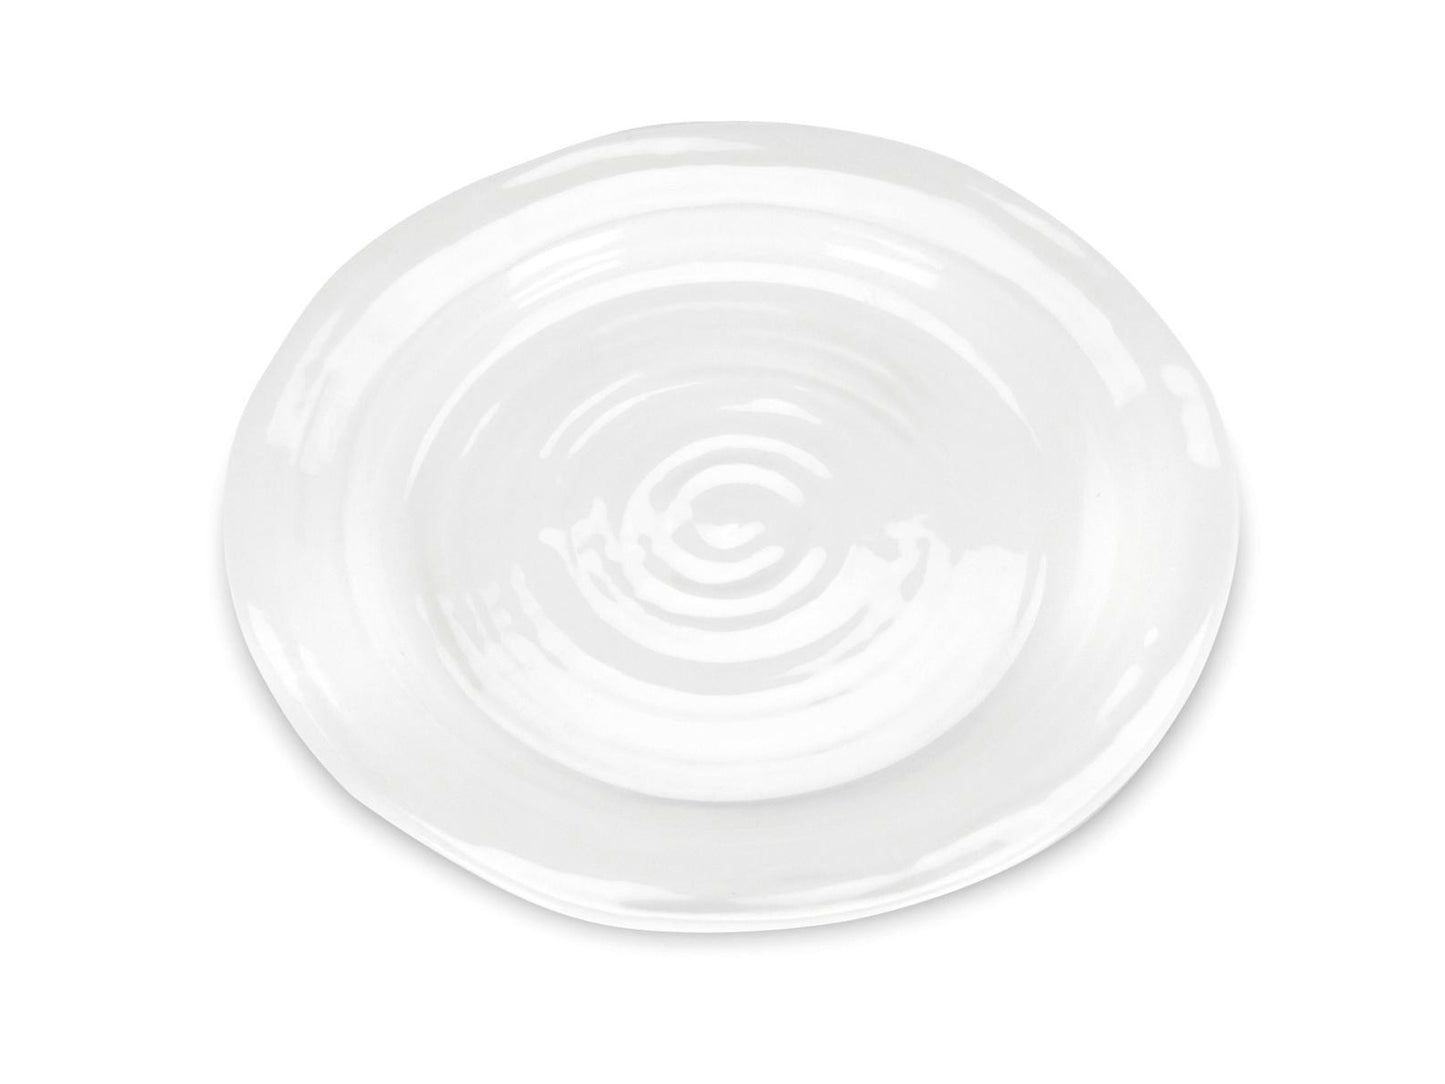 This Sophie Conran 6" Tea Plate has been designed with Sophie's staple ripple effect and finished with a clear glaze over the white porcelain. Petite in size, these would be ideal for serving cake at your very own afternoon tea party.